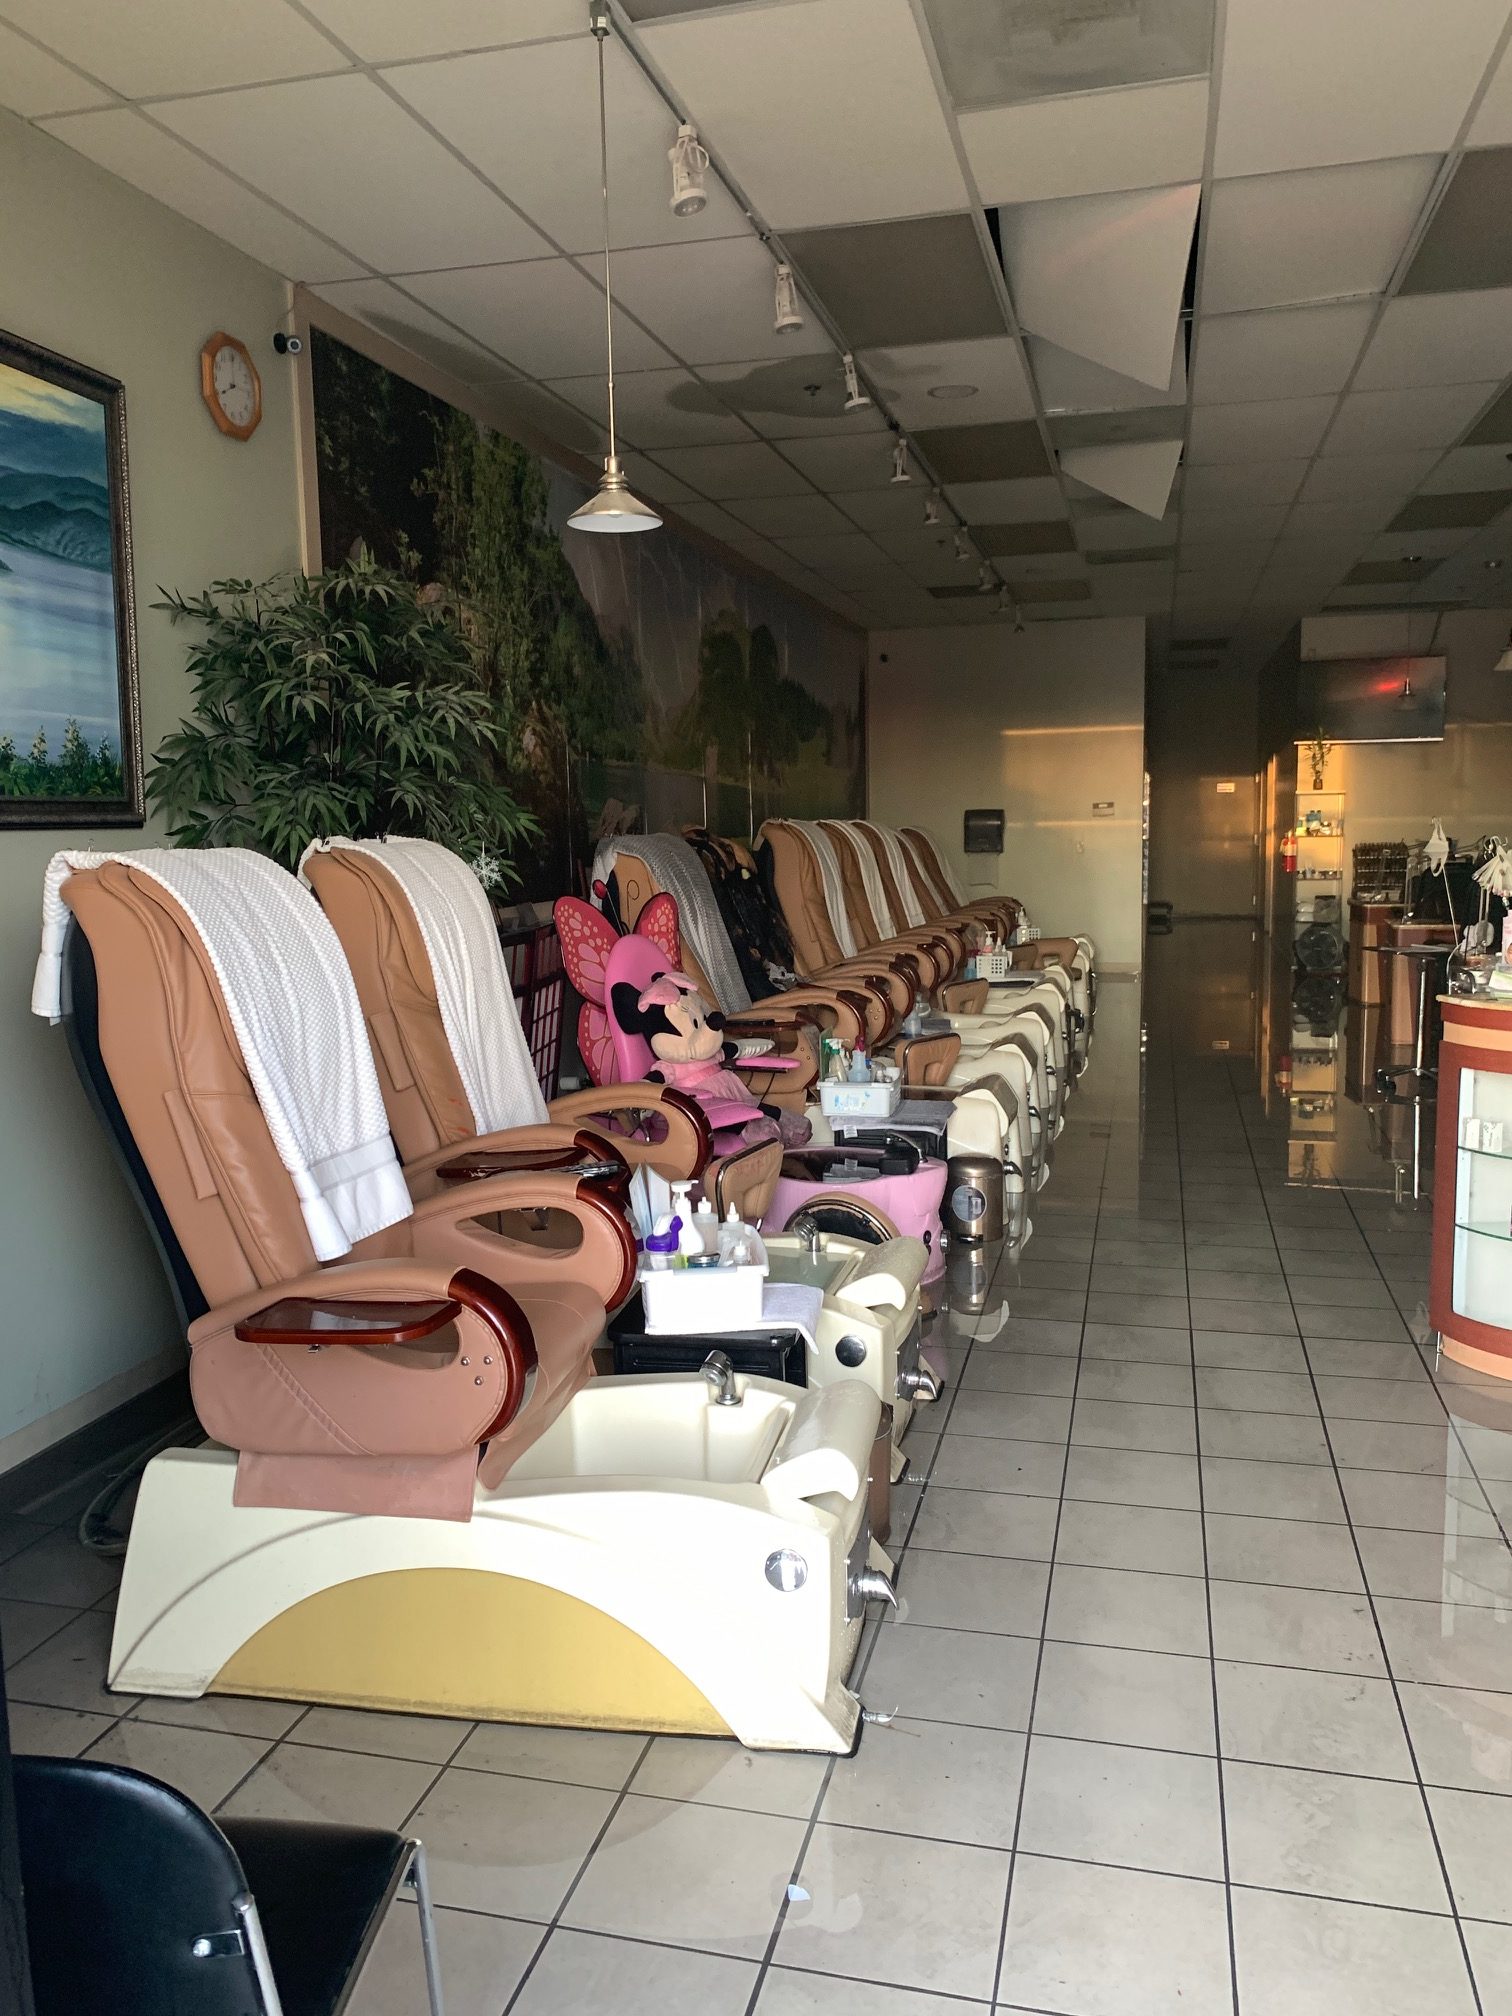 Nail Salon 60611 - Bedazzled Nails & Spa of Chicago, Illinois - Gel  Manicure, Dipping Powder, Organic Pedicure, Acrylic, Waxing